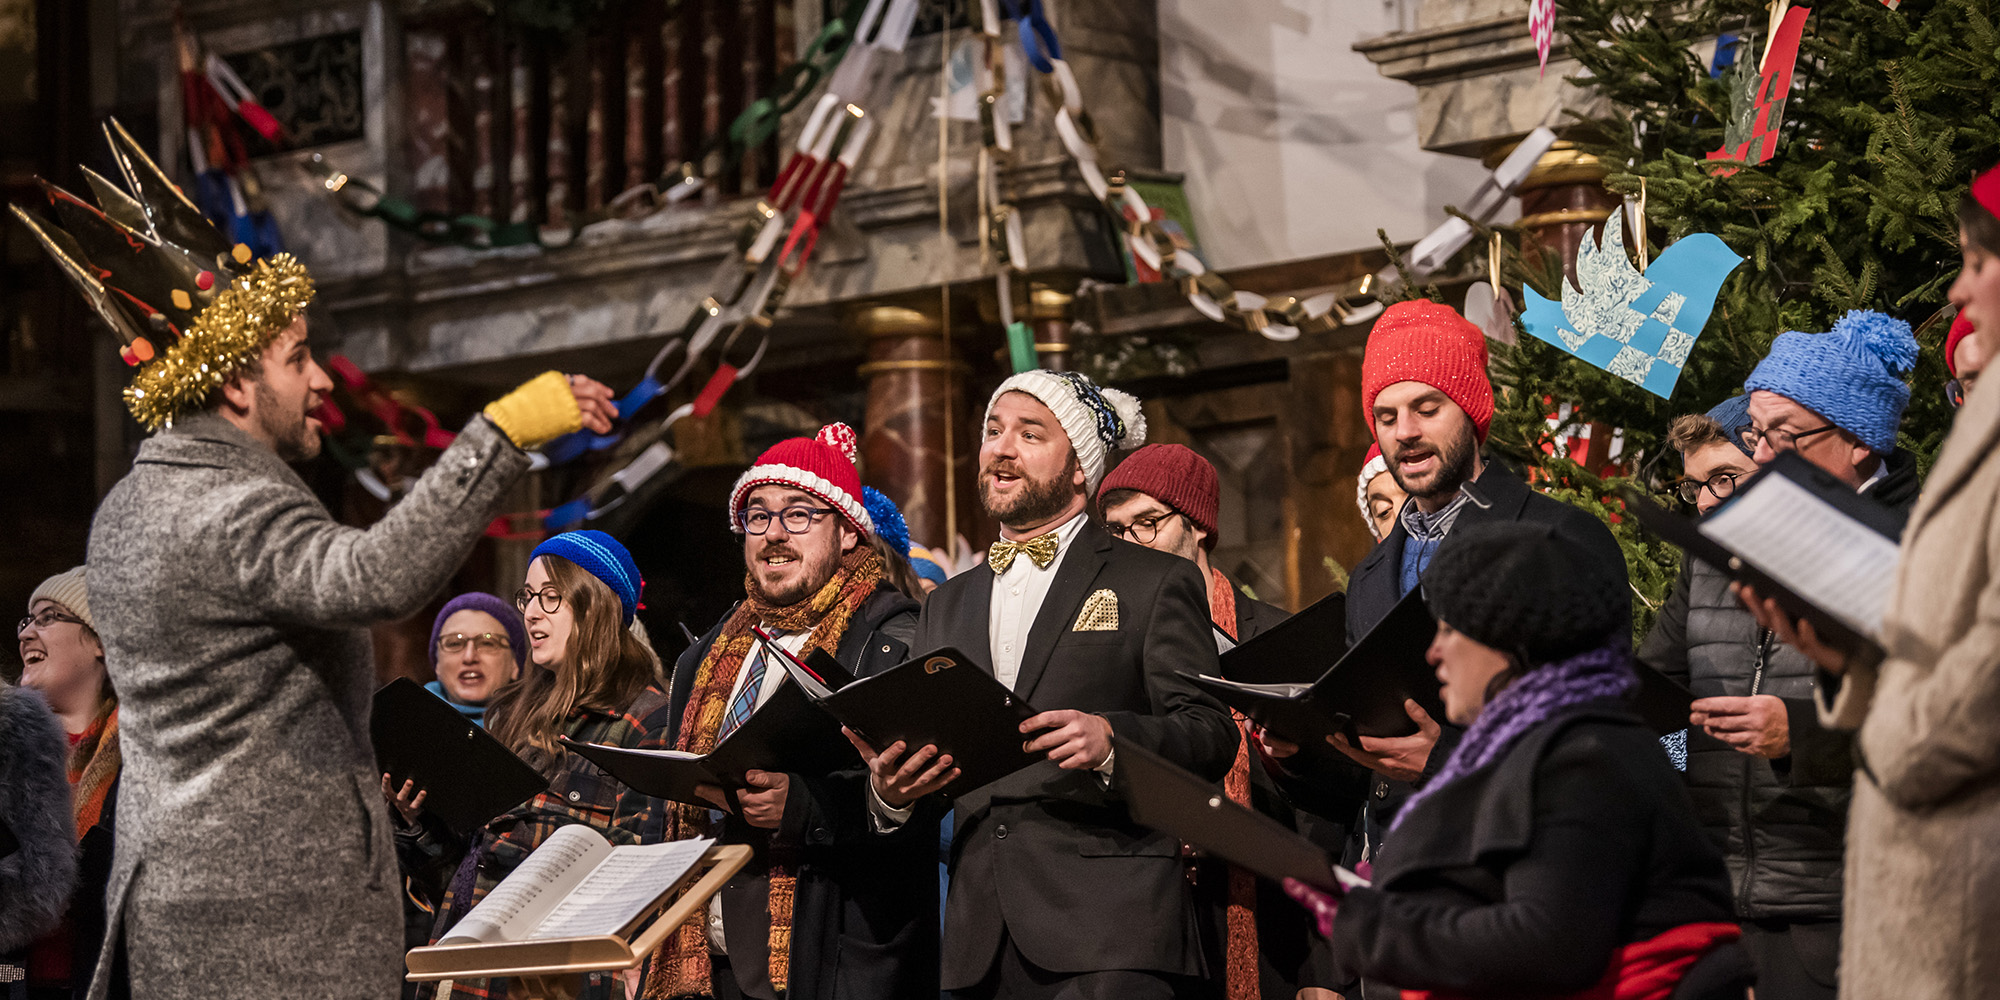 A group of choral singers wearing festive gear and Santa hats, stand on the Globe Theatre stage in front of a decorated Christmas tree, singing.